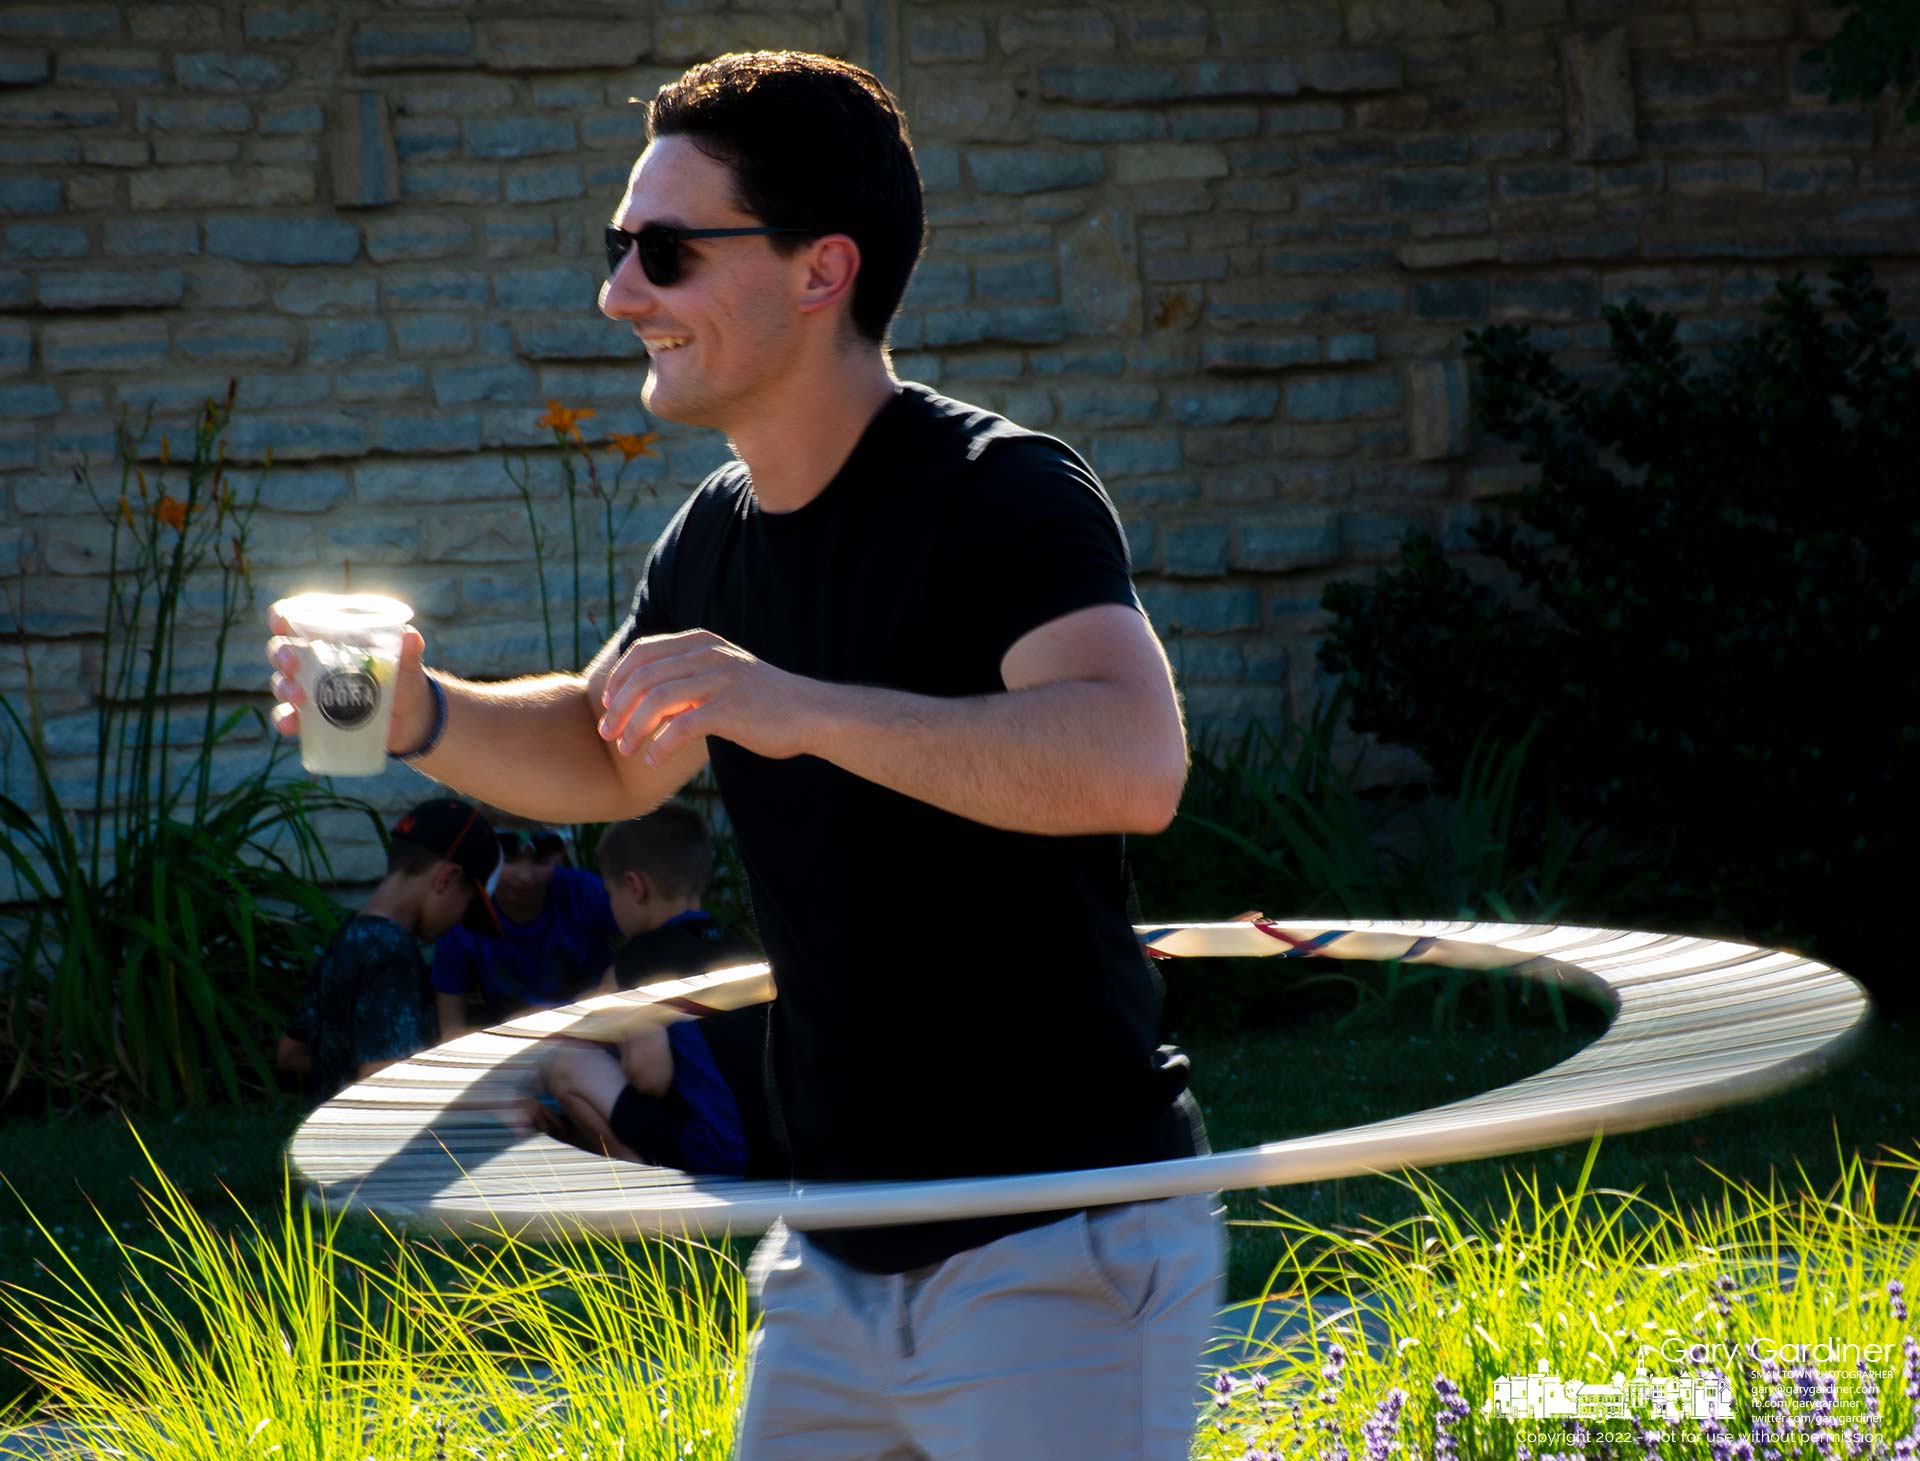 A man, DORA drink in hand, shows his prowess at spinning the hula hoop during Fourth Friday in Uptown Westerville. My Final Photo for June 24, 2022.